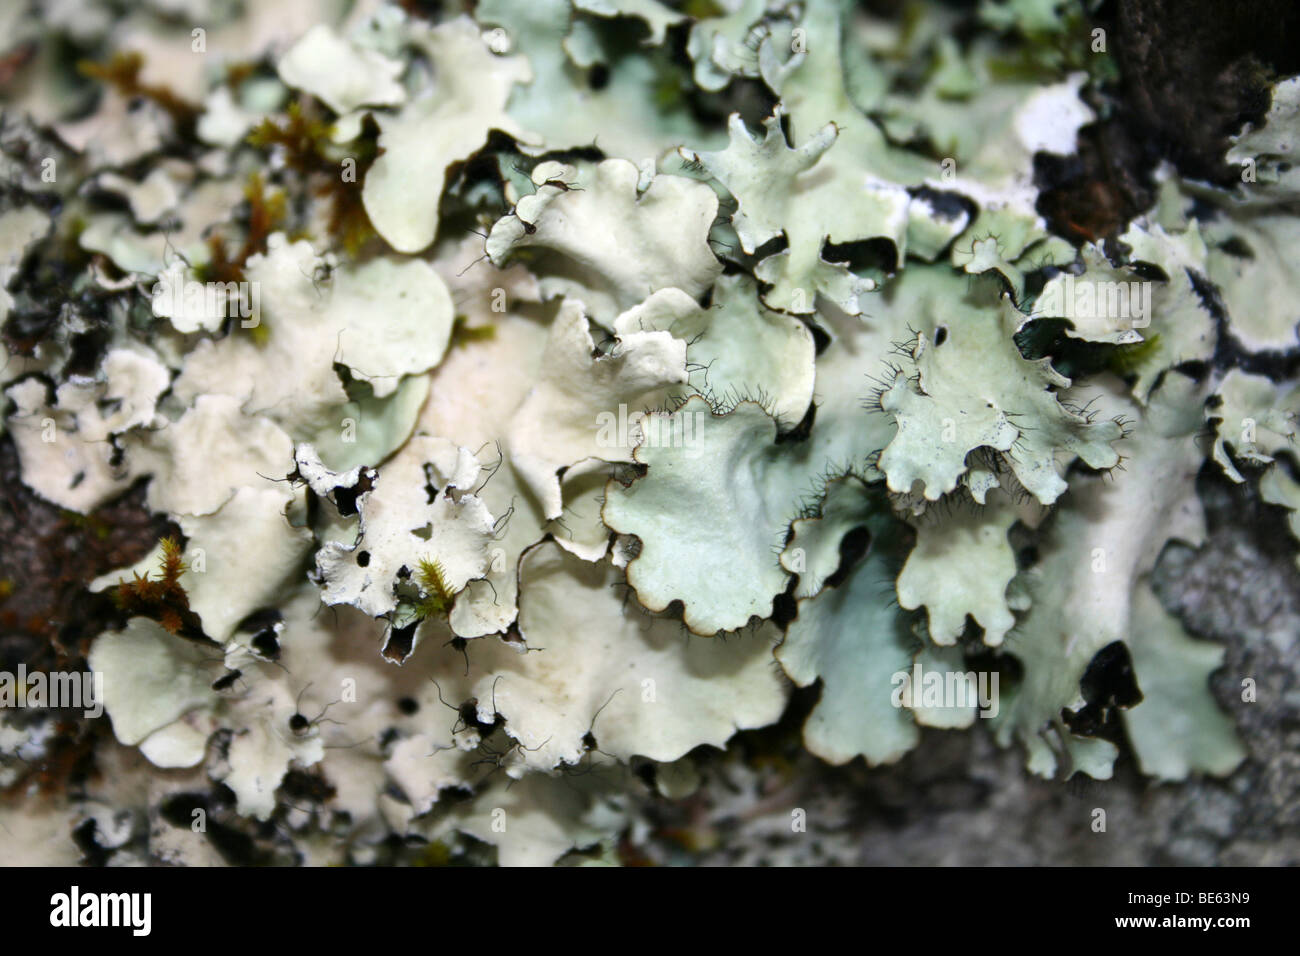 Foliose Lichen On A Tree At Blyde River Canyon, South Africa Stock Photo